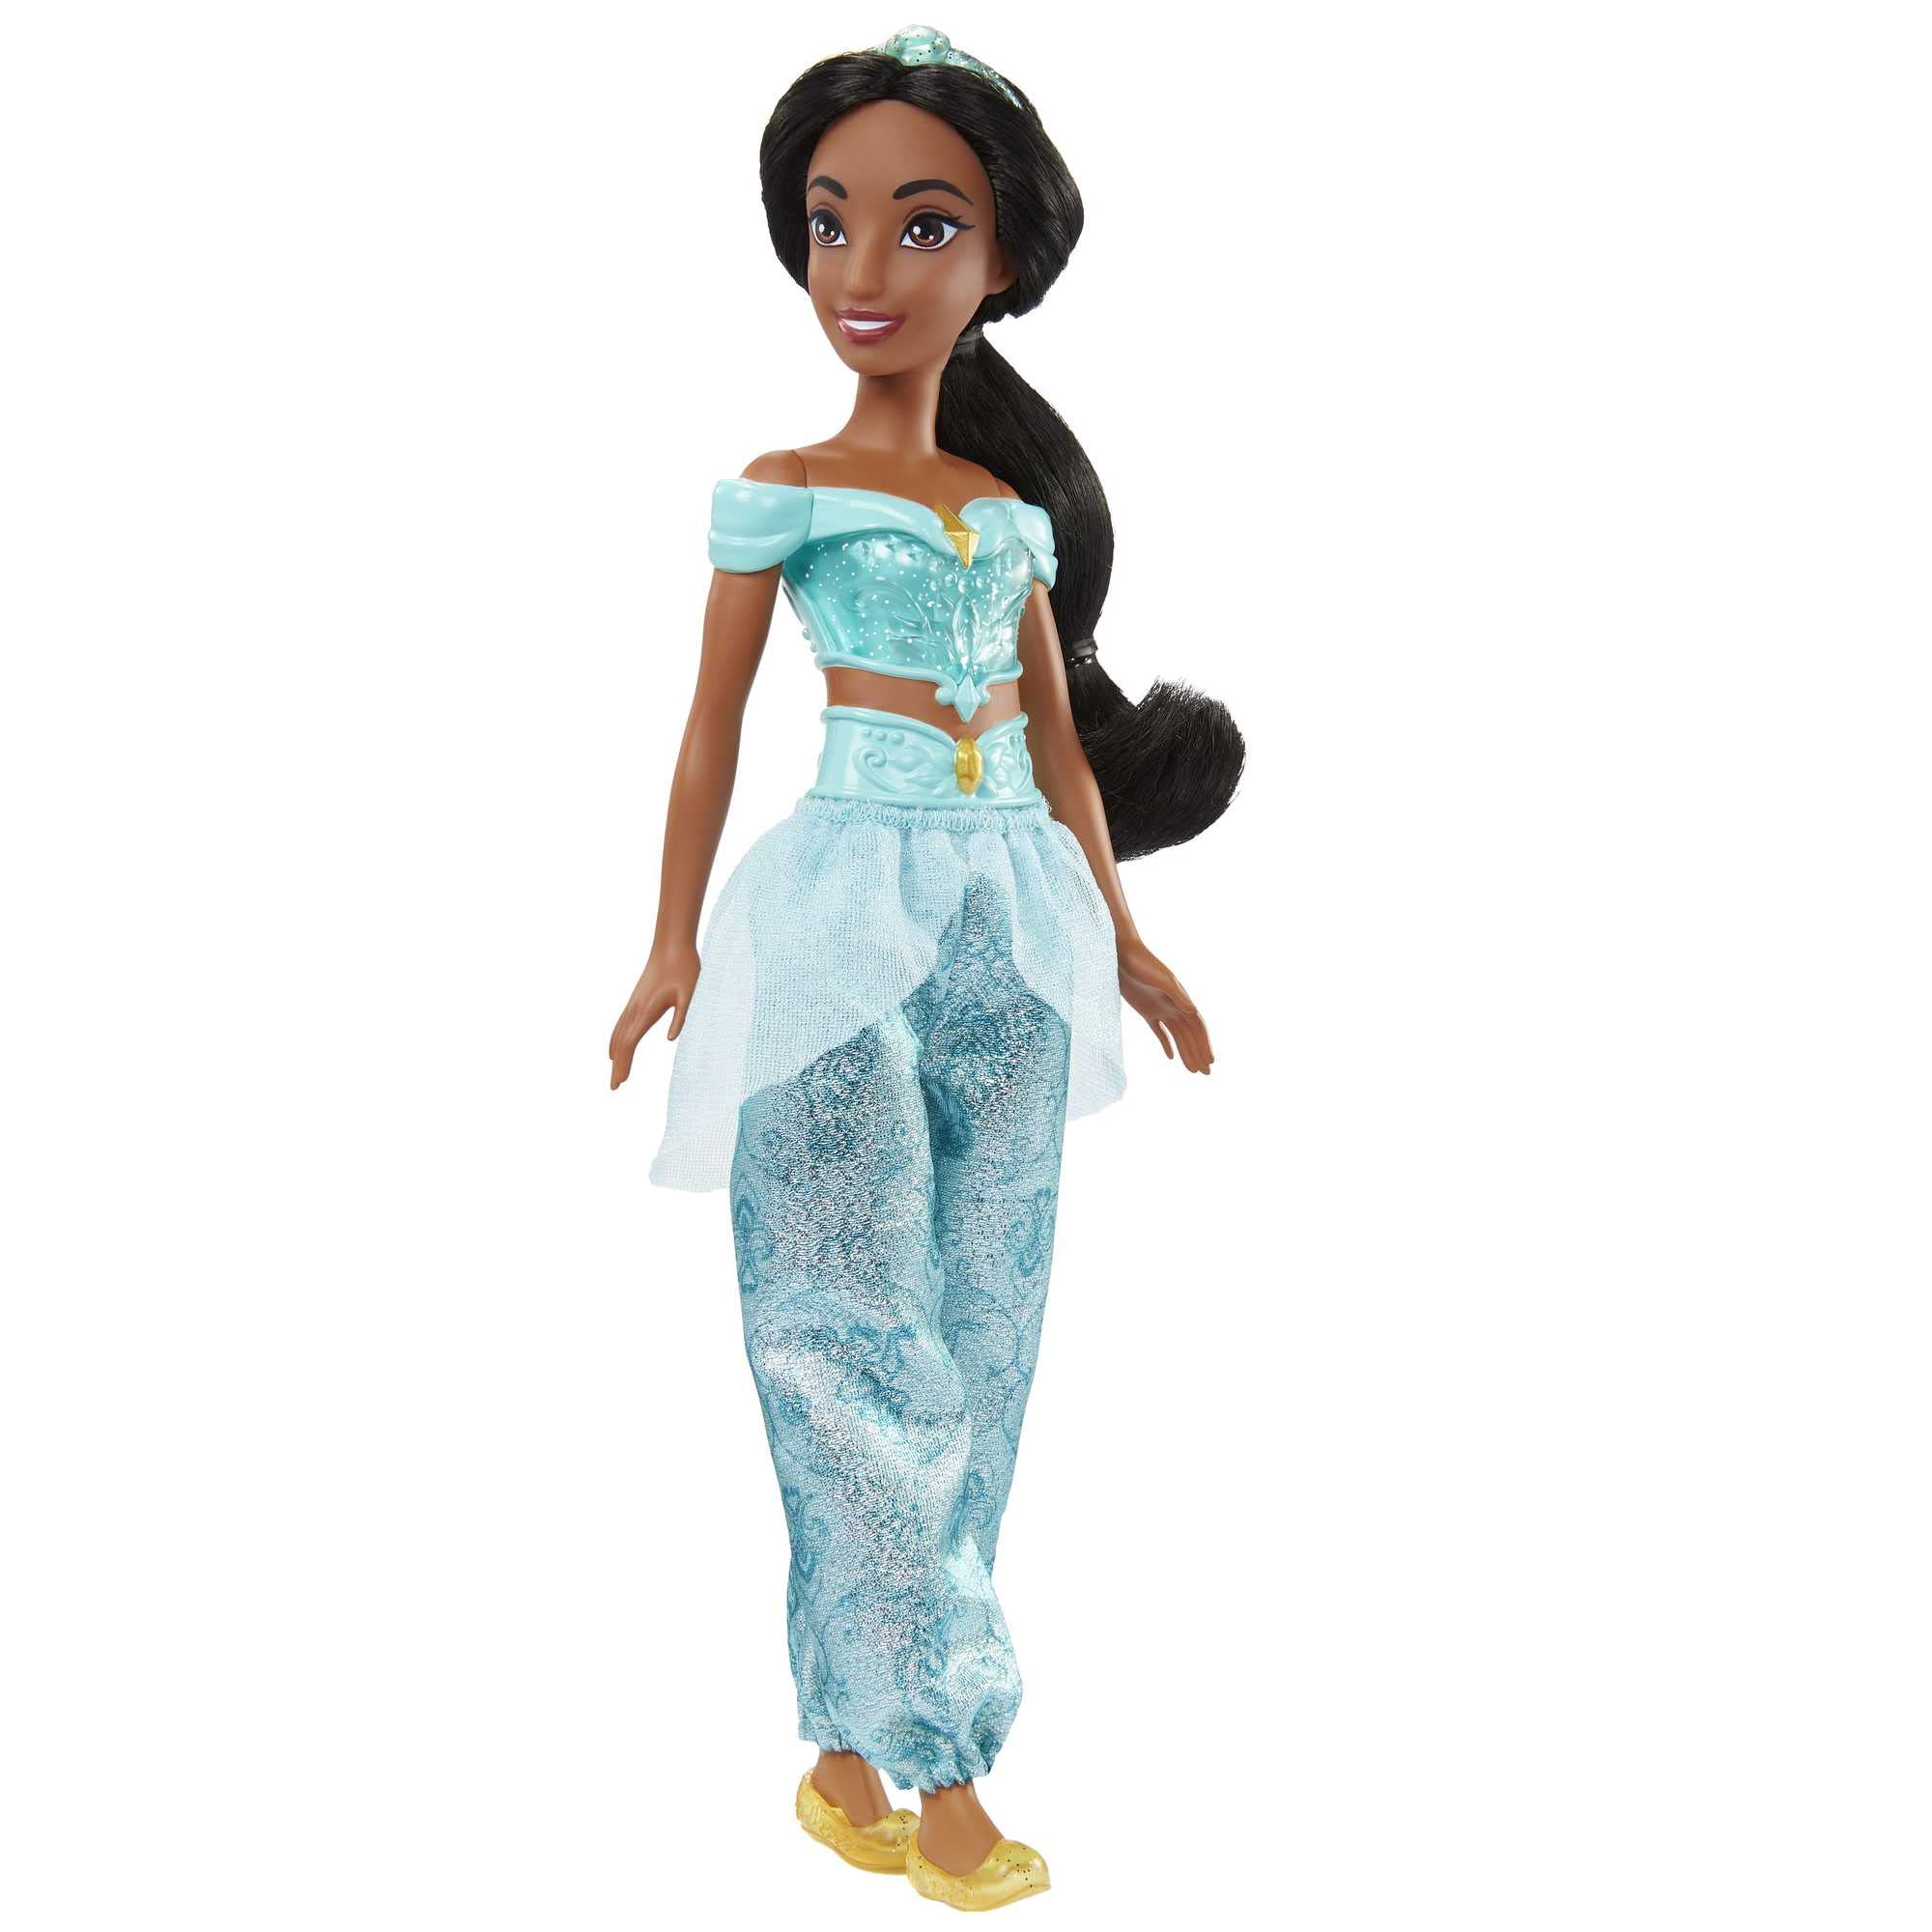 Disney Princess Fashion Doll Gift Set with 13 Dolls in Sparkling Clothing and Accessories, Inspired by Disney Movies (Amazon Exclusive)